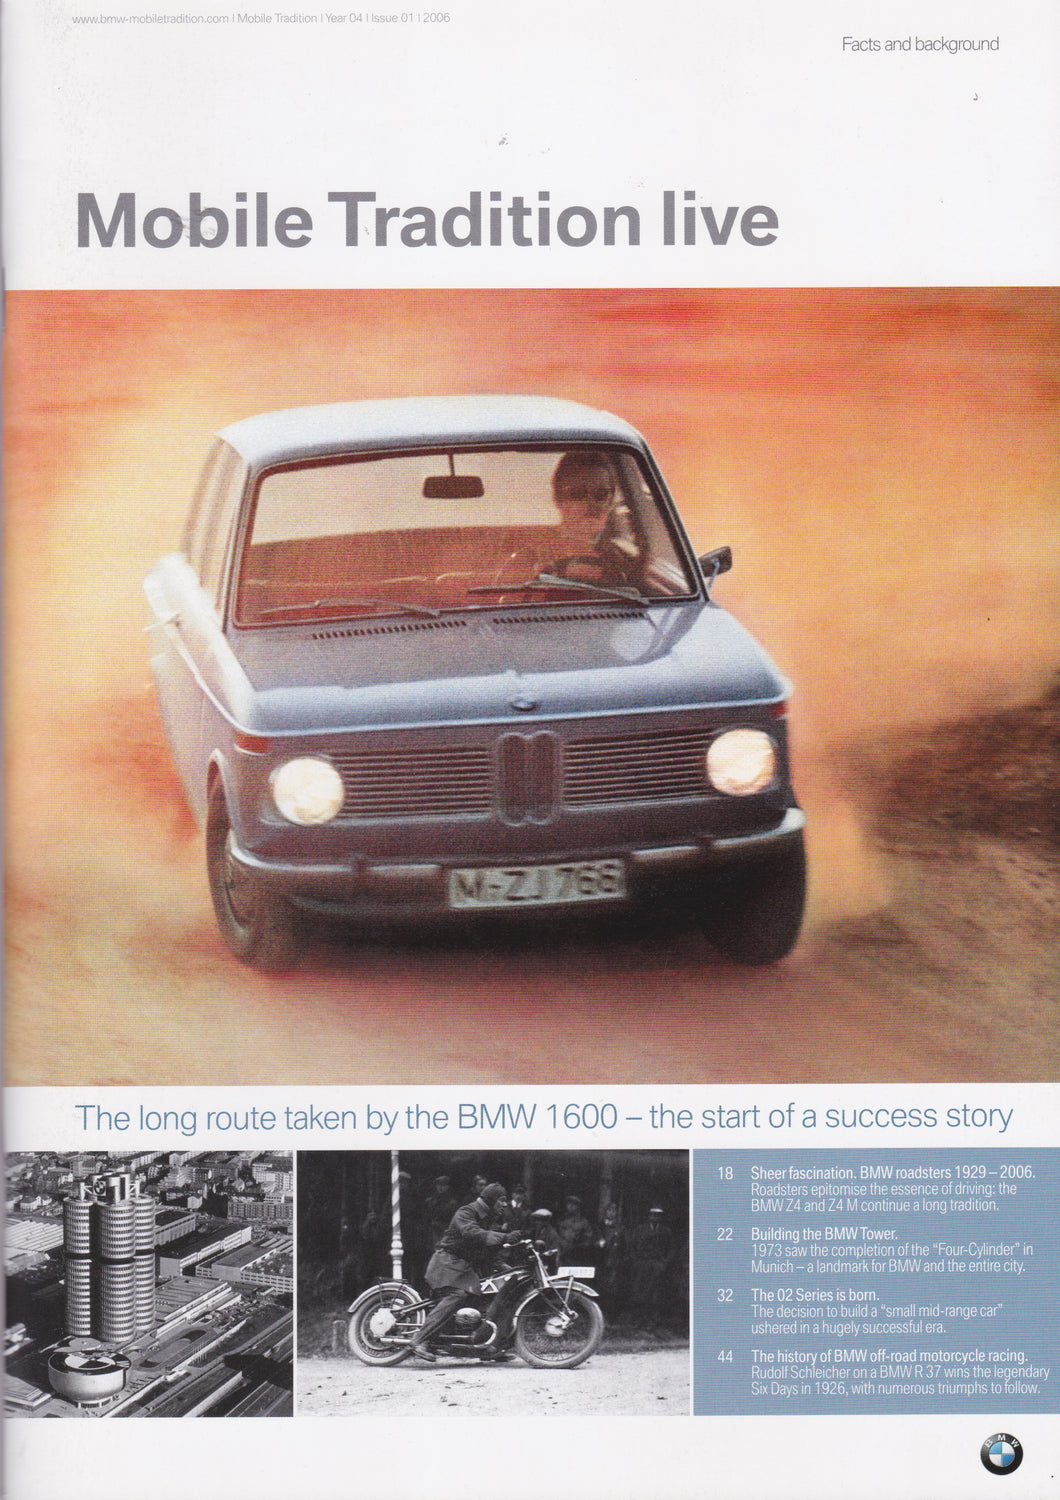 Mobile Tradition Live / Issue 01 / 2006